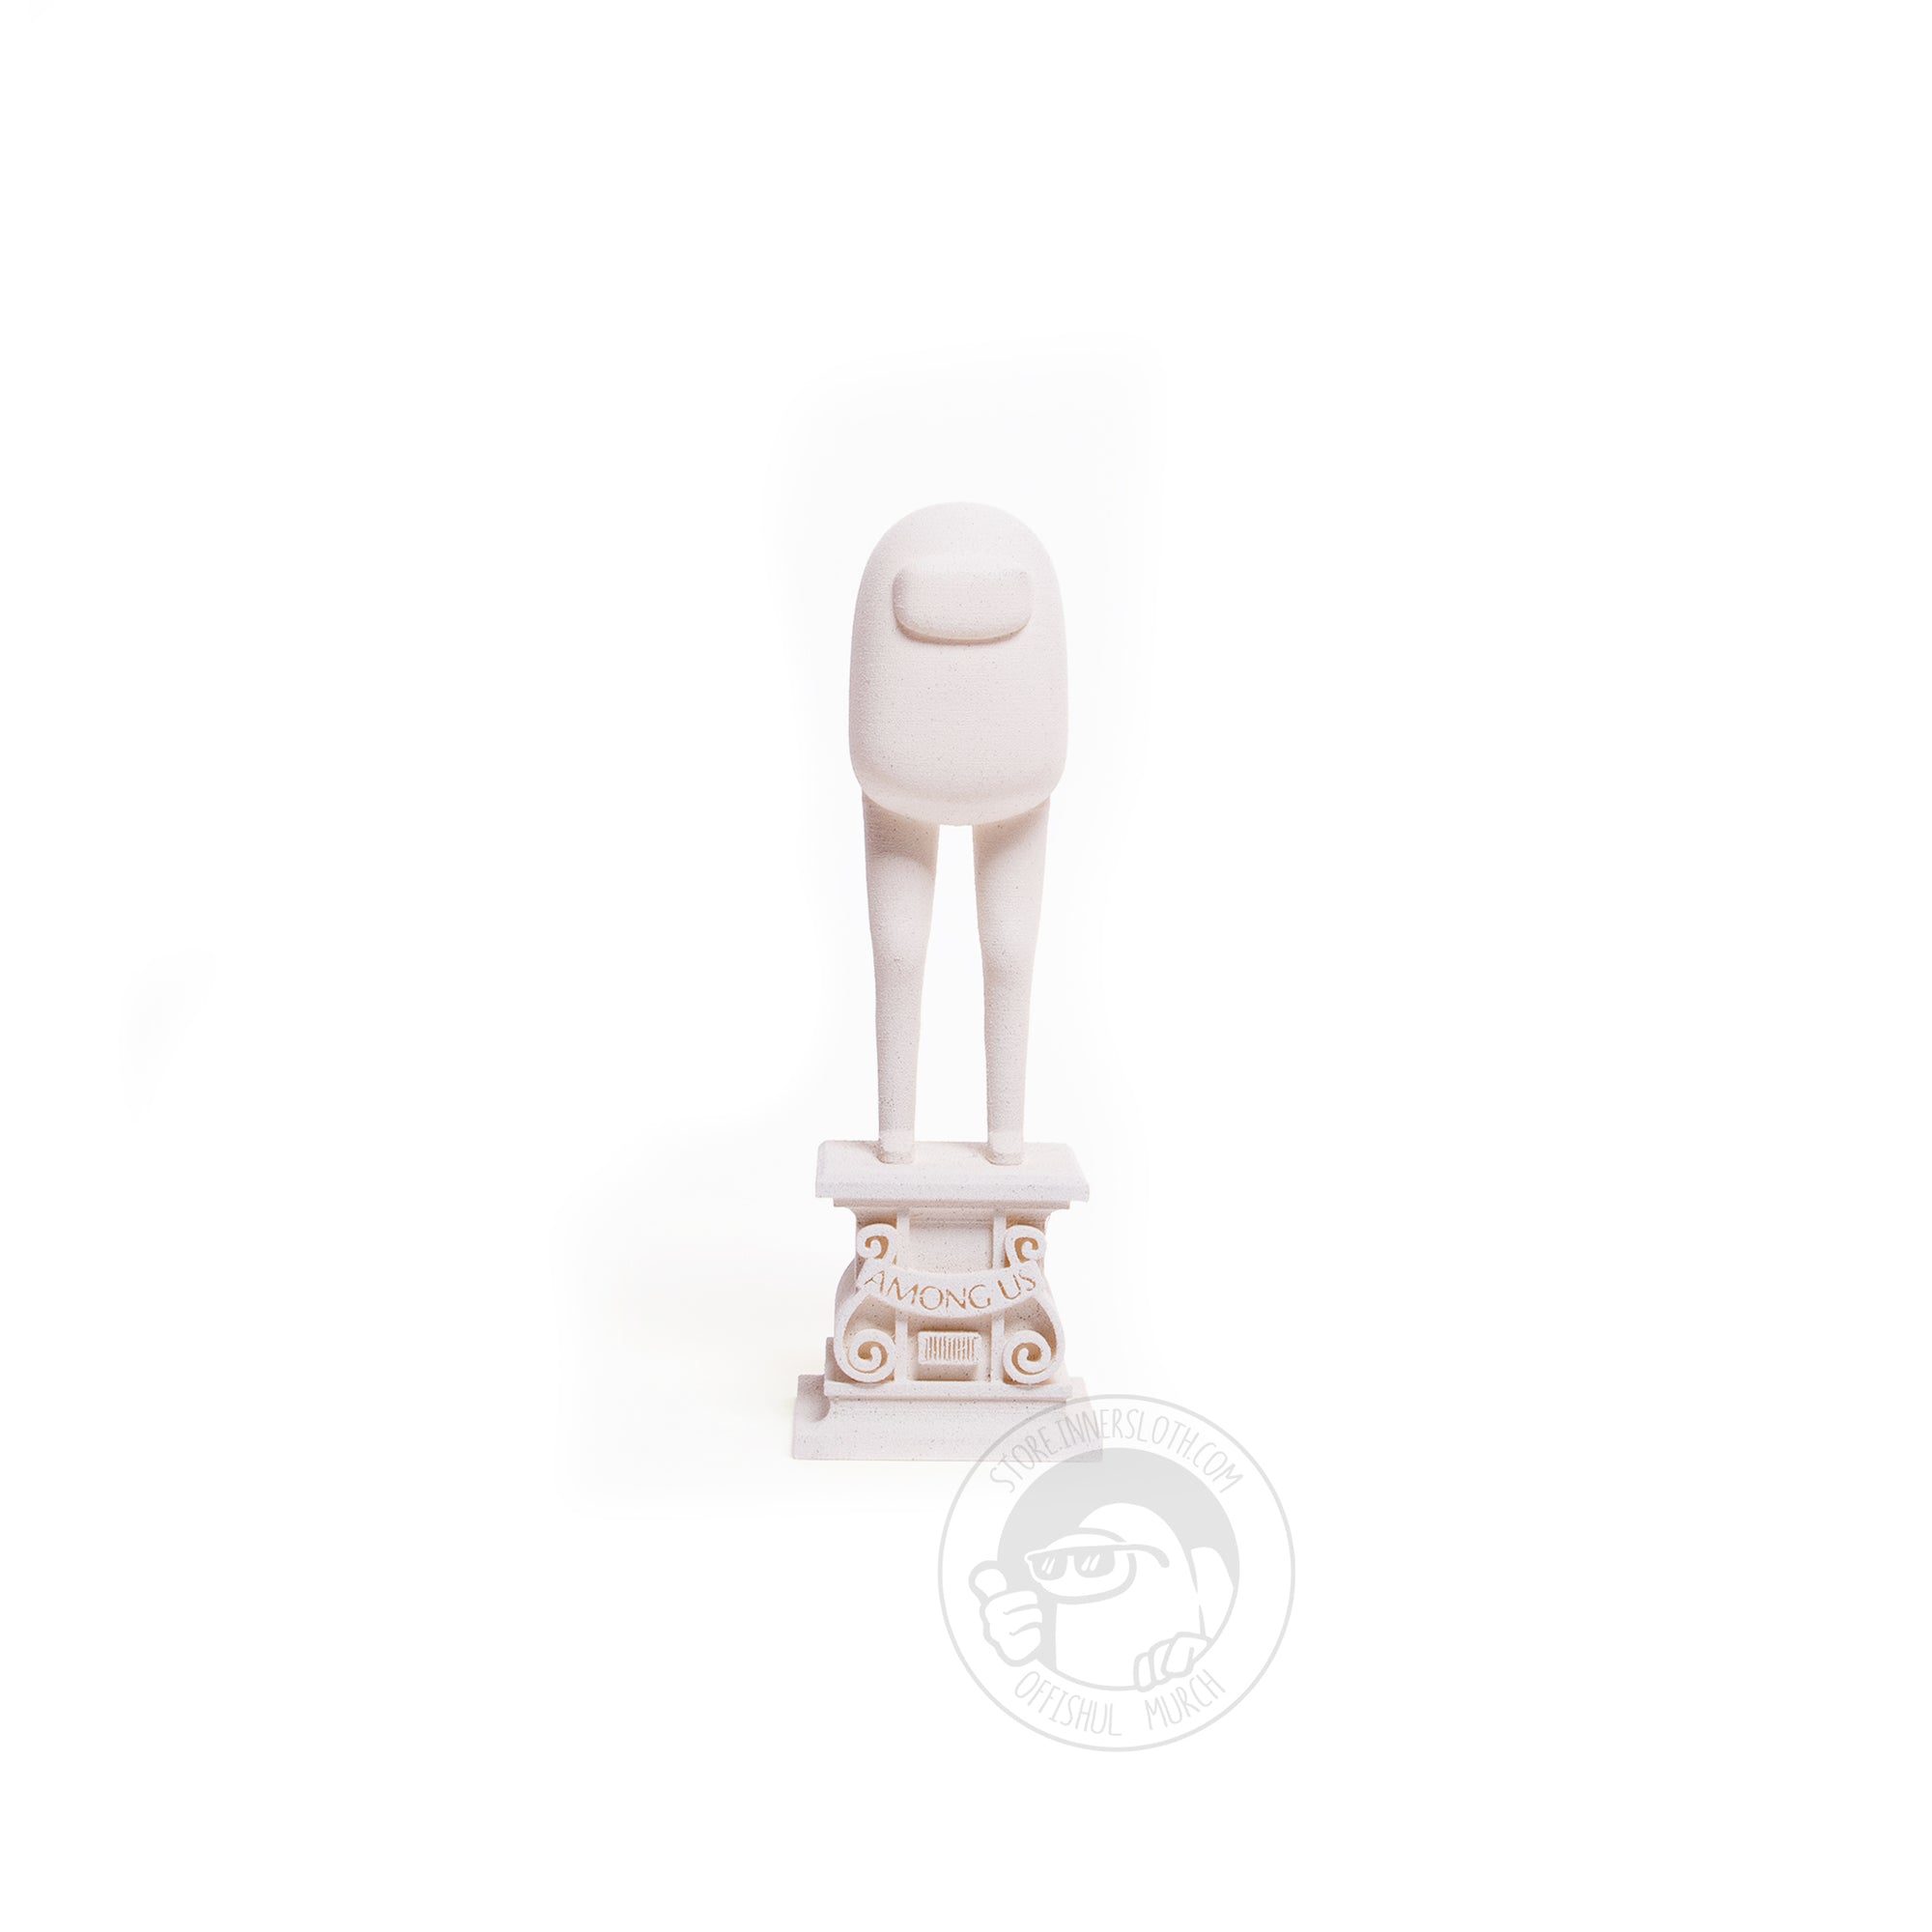 A front-facing product photo of an all white 3D printed Crewmate figurine standing on a pedestal by Garbage Inc. The Crewmate body is a rounded egg shape with extremely long legs and teeny tiny feet. The Crewmate is standing on a fancy pedestal with a banner that reads “Among Us” across the front. 